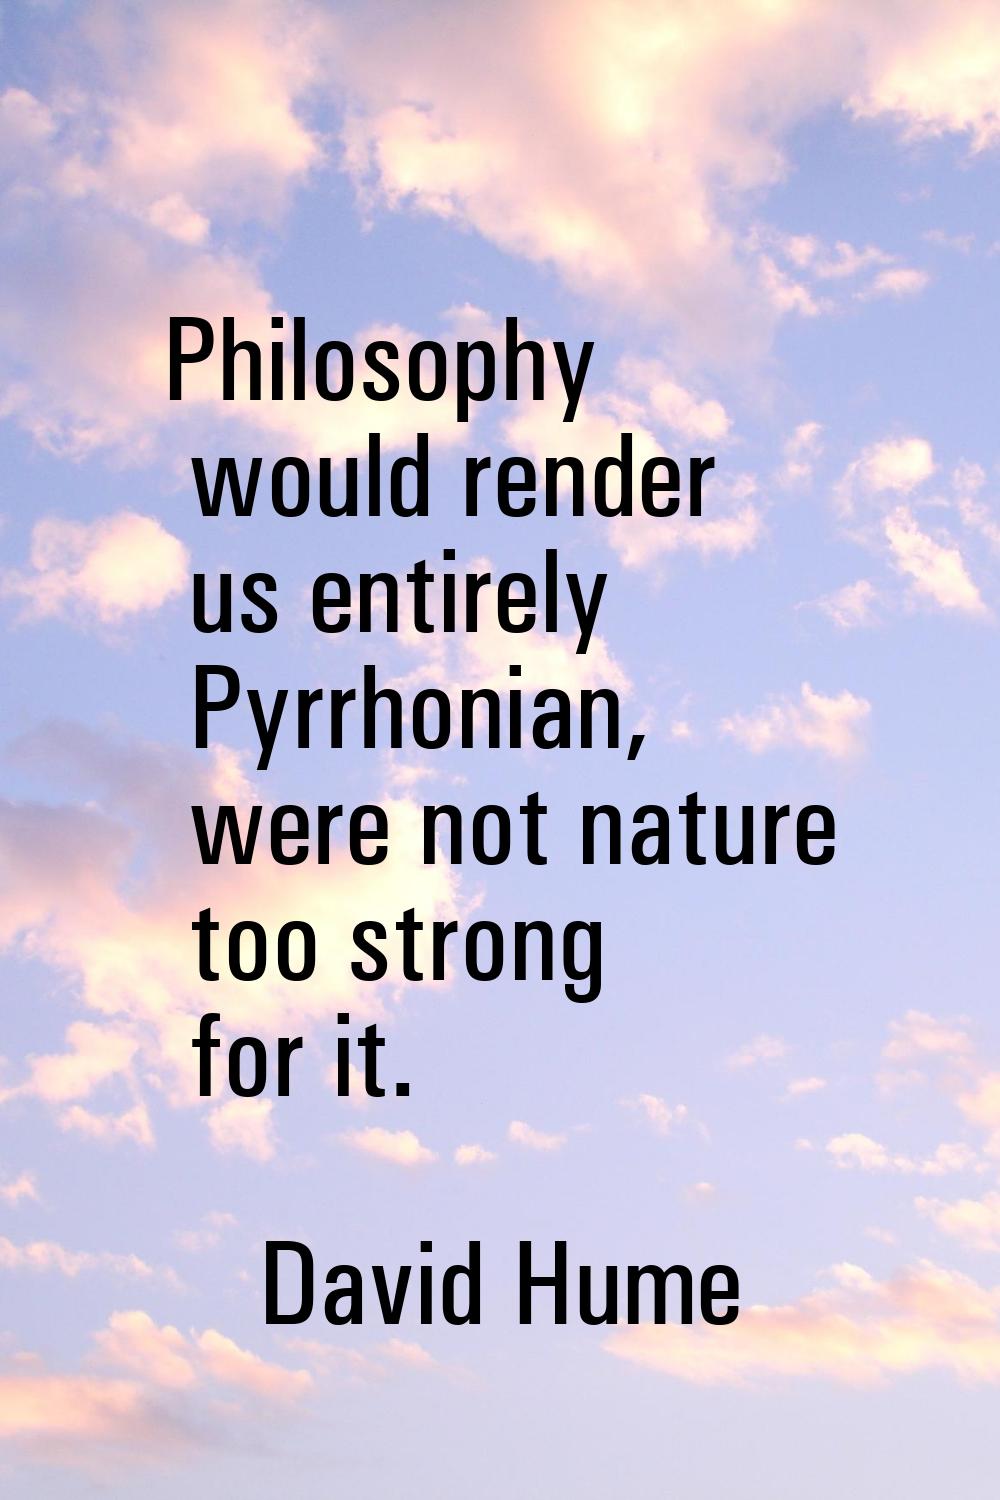 Philosophy would render us entirely Pyrrhonian, were not nature too strong for it.